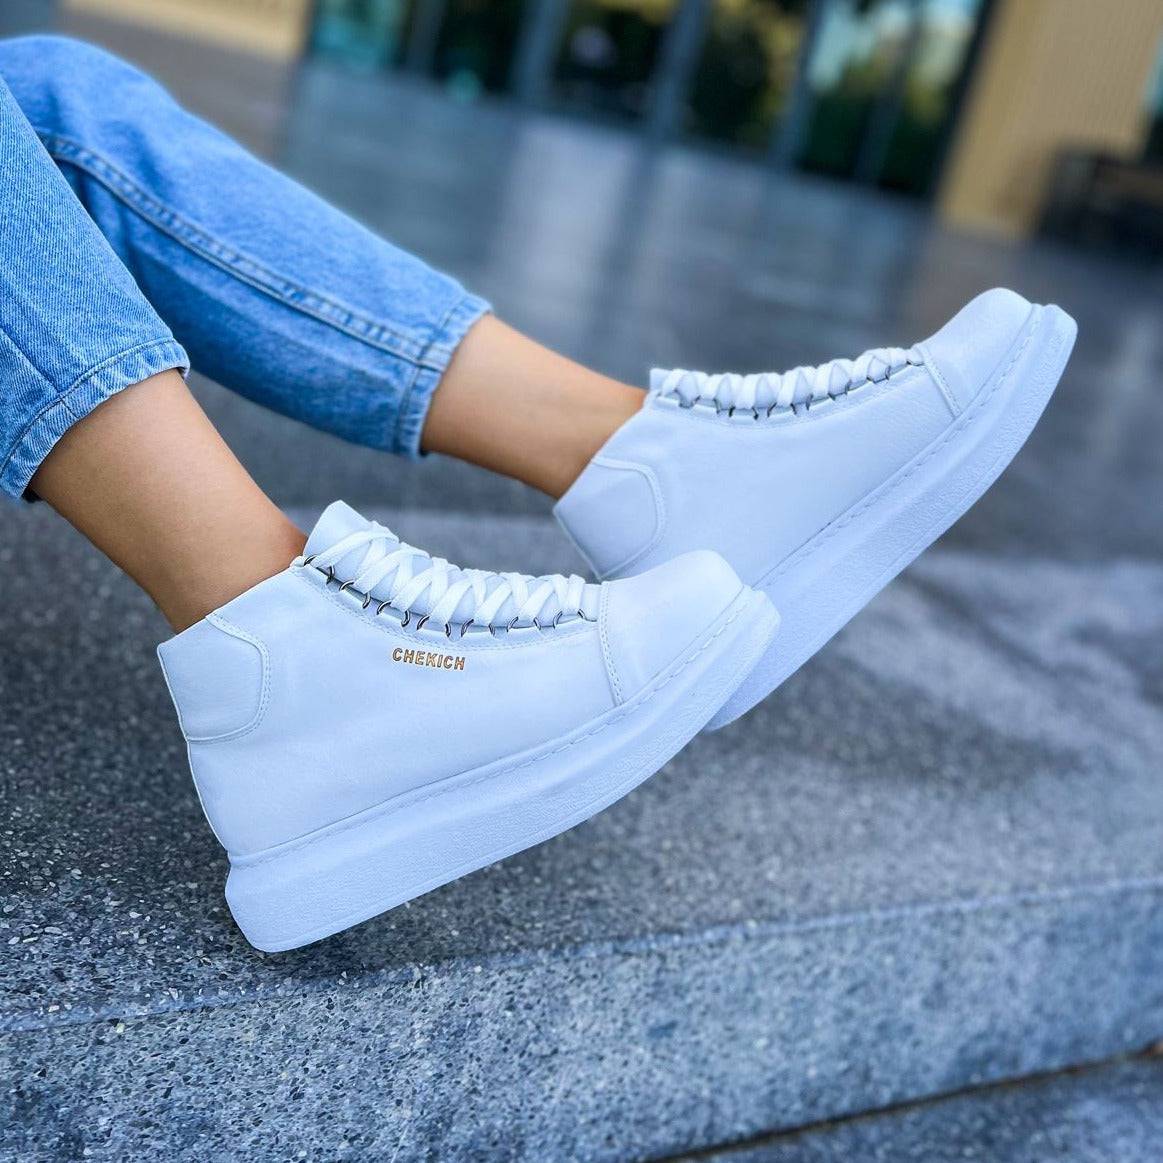 High Top Platform Sneakers for Women by Apollo | Kelly in Pure Purity